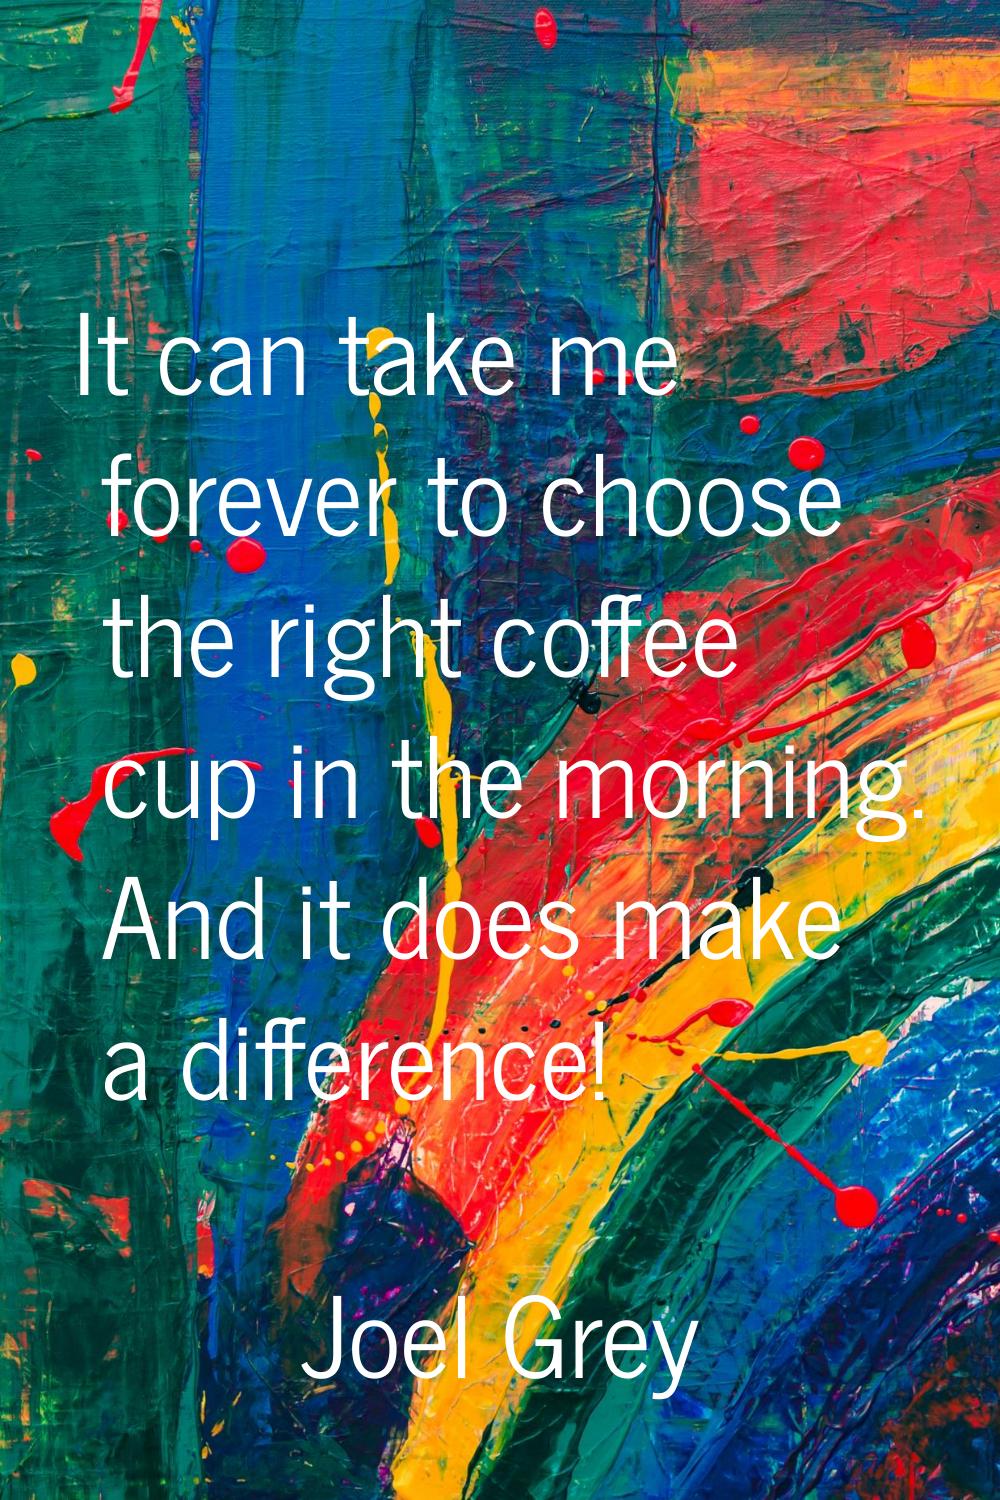 It can take me forever to choose the right coffee cup in the morning. And it does make a difference